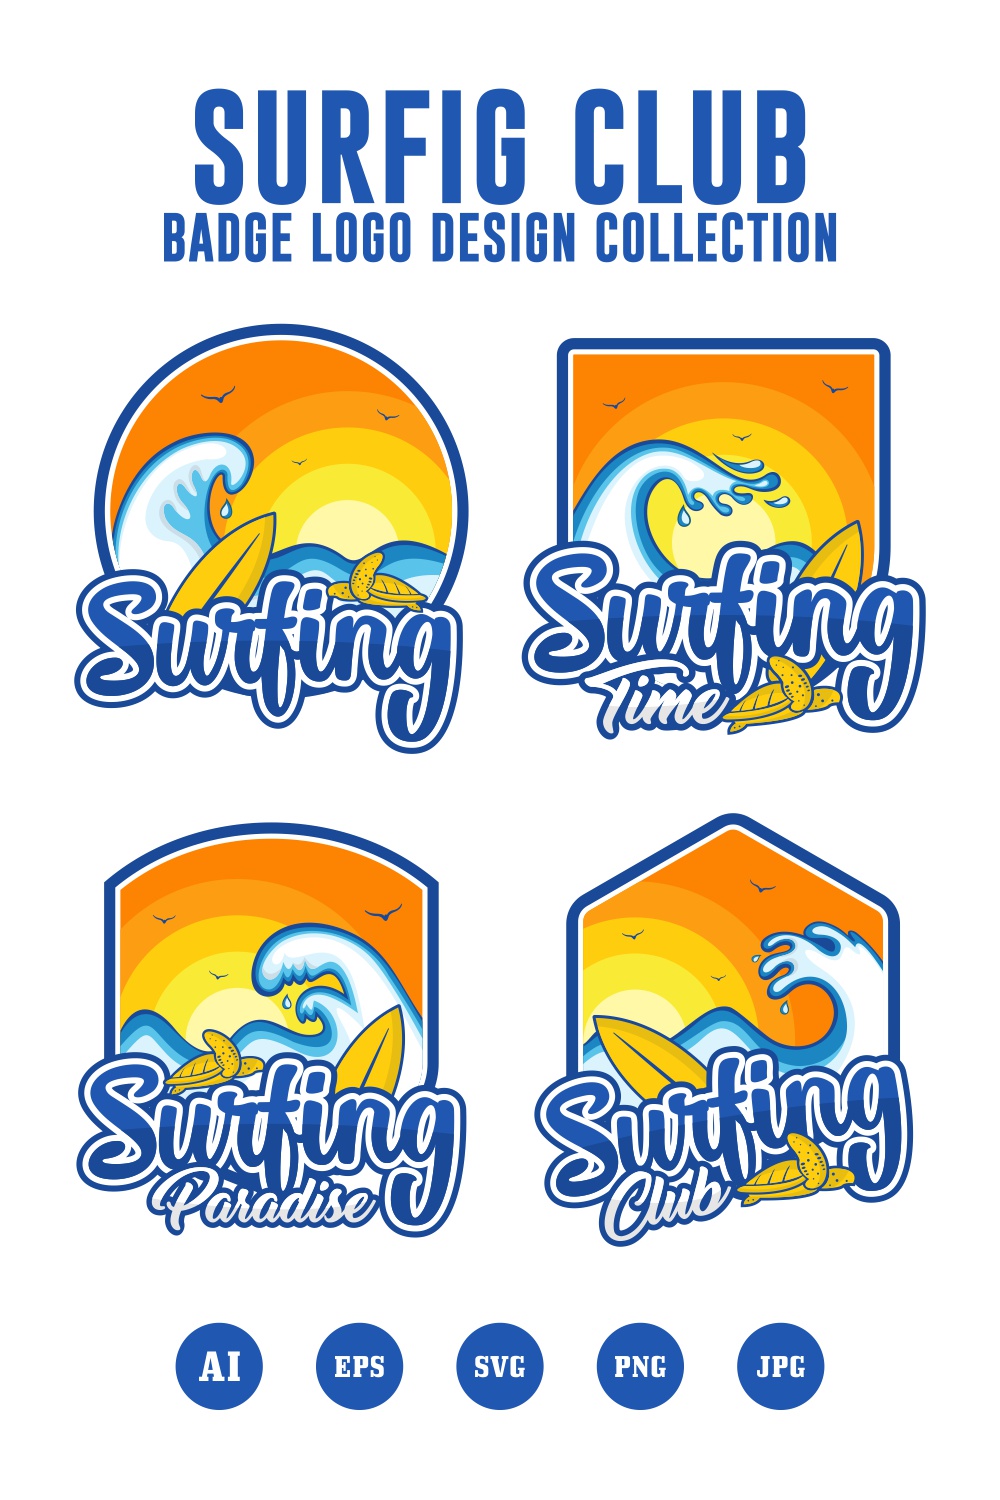 Set Surfing Club logo design collection - $4 pinterest preview image.